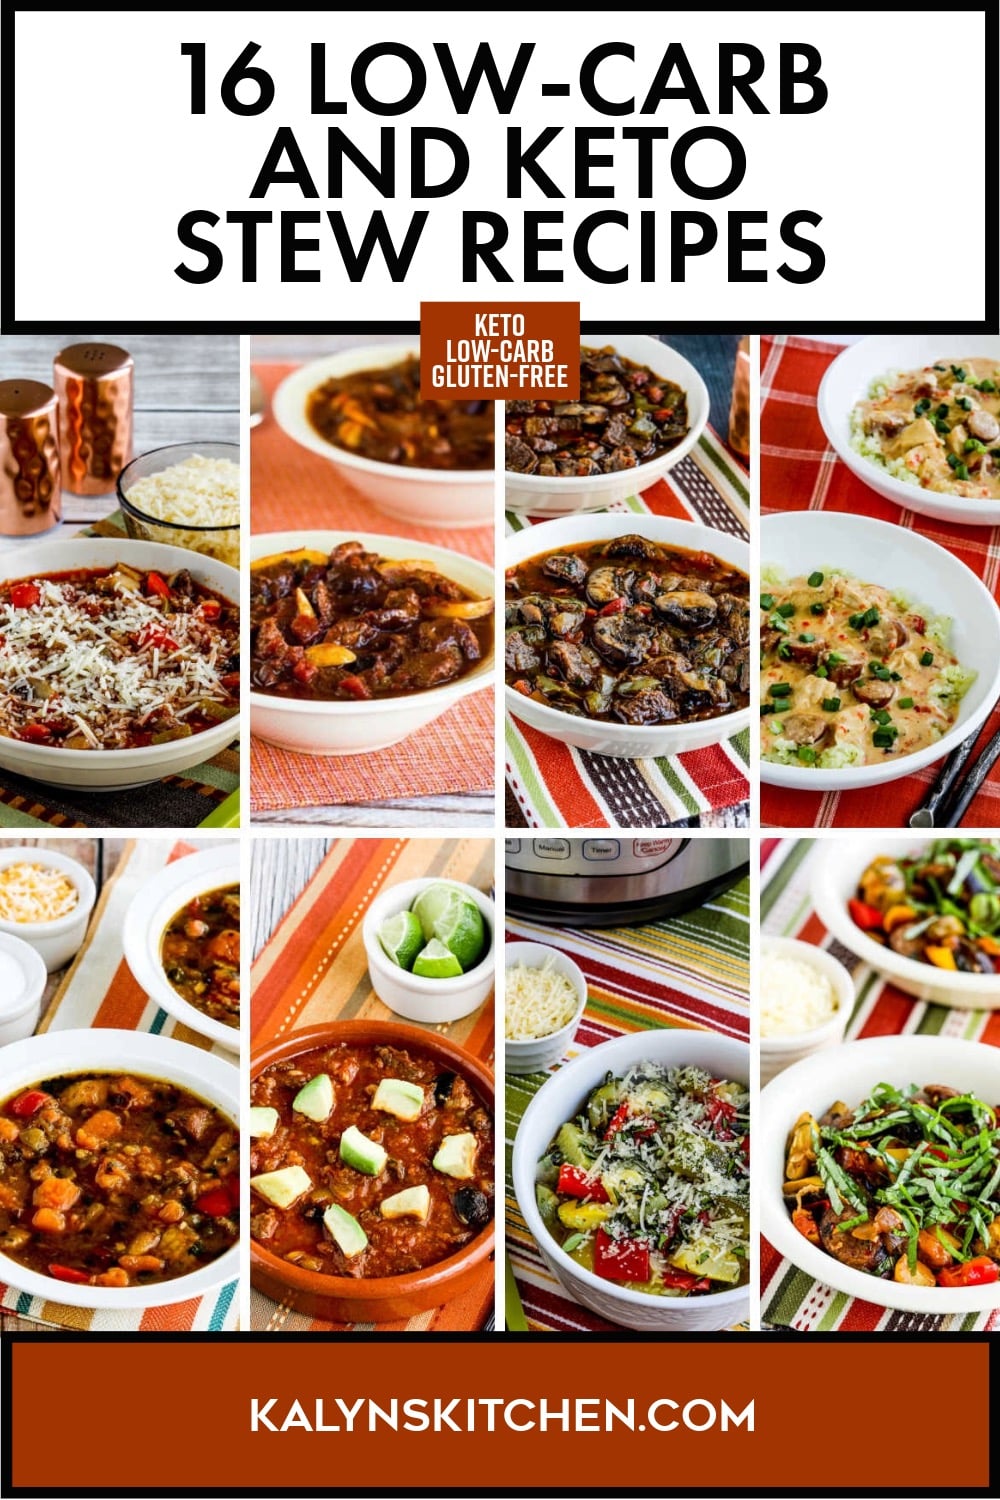 Pinterest image of 16 Low-Carb and Keto Stew Recipes